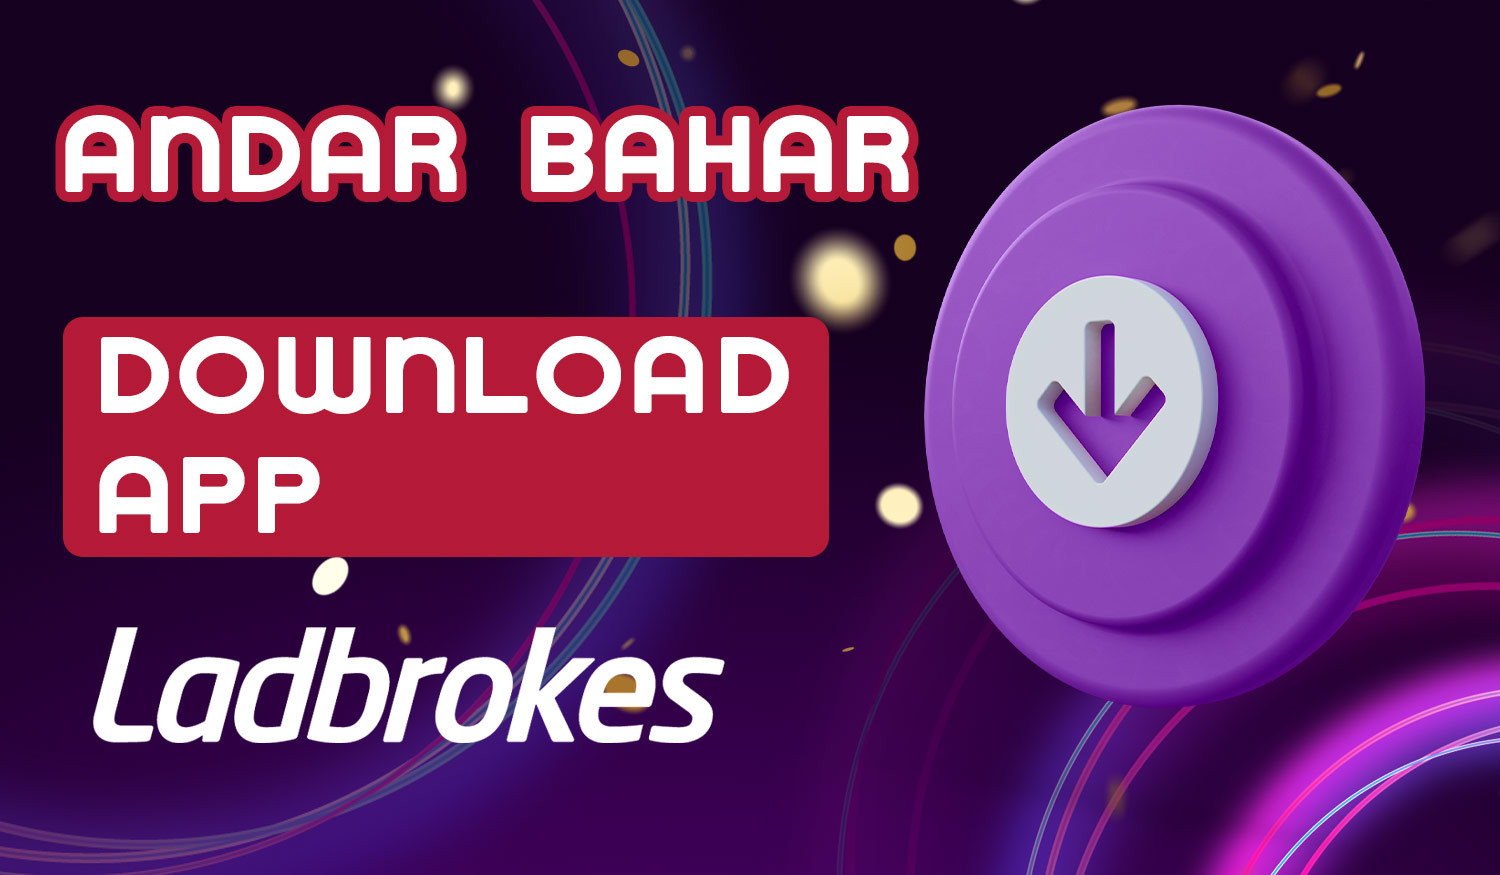 A detailed guide on how to install and download the mobile application from Ladbrokes India bookmaker on Android and iOS